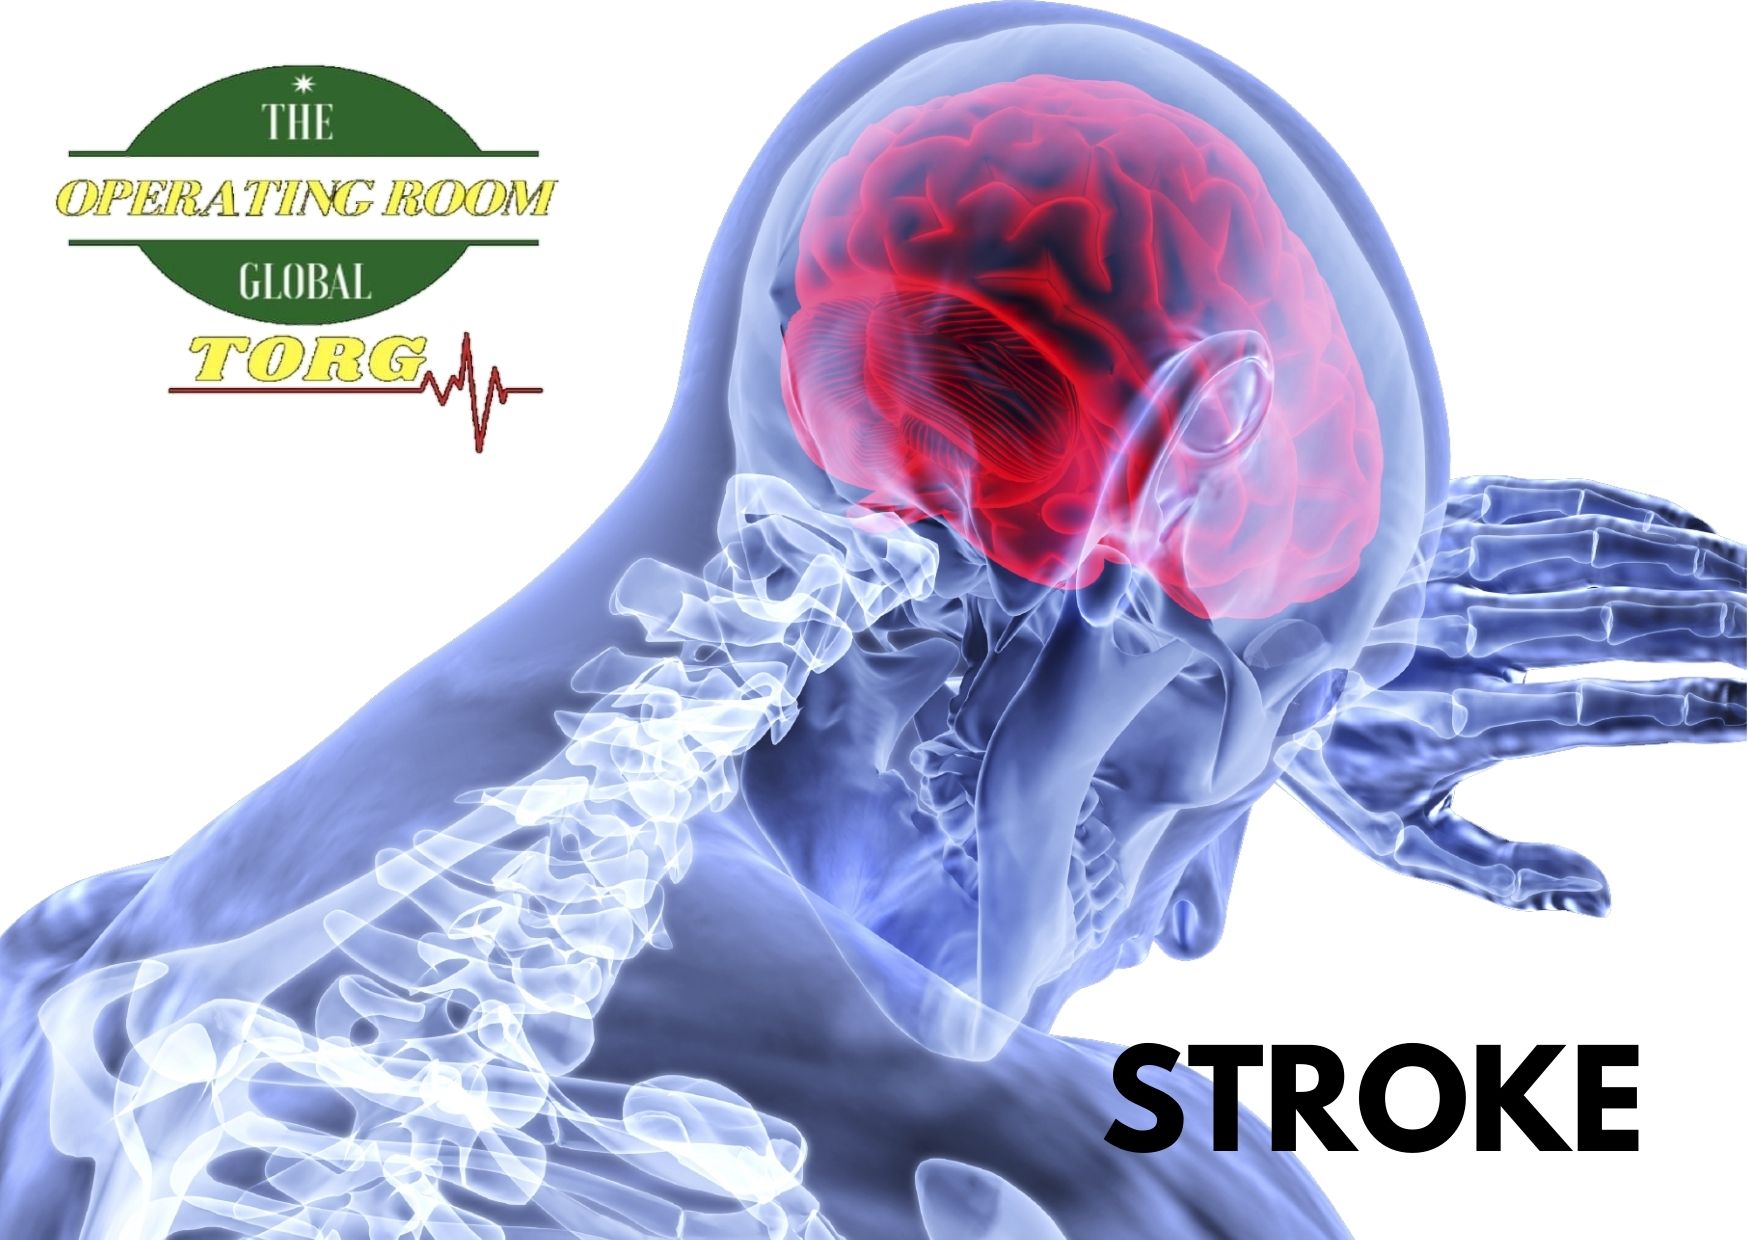 Stroke – Cardiovascular Accident: What you need to know!